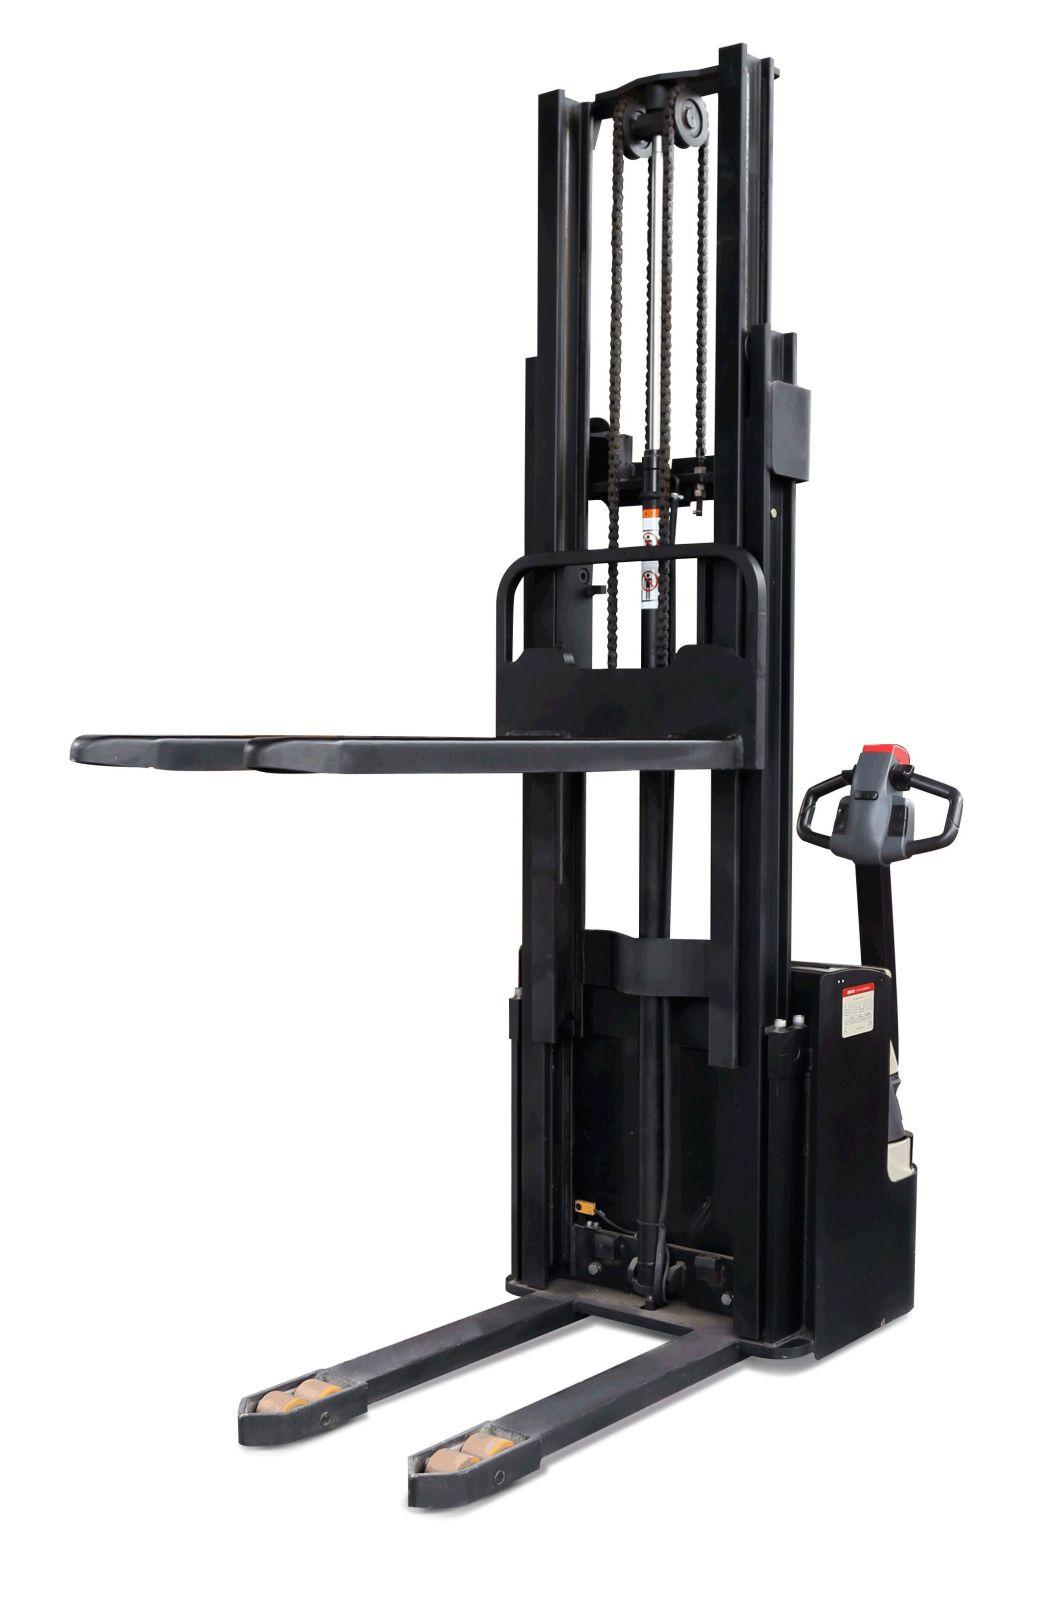 2000kg 2t Walking Type High Quality Electric Stacker